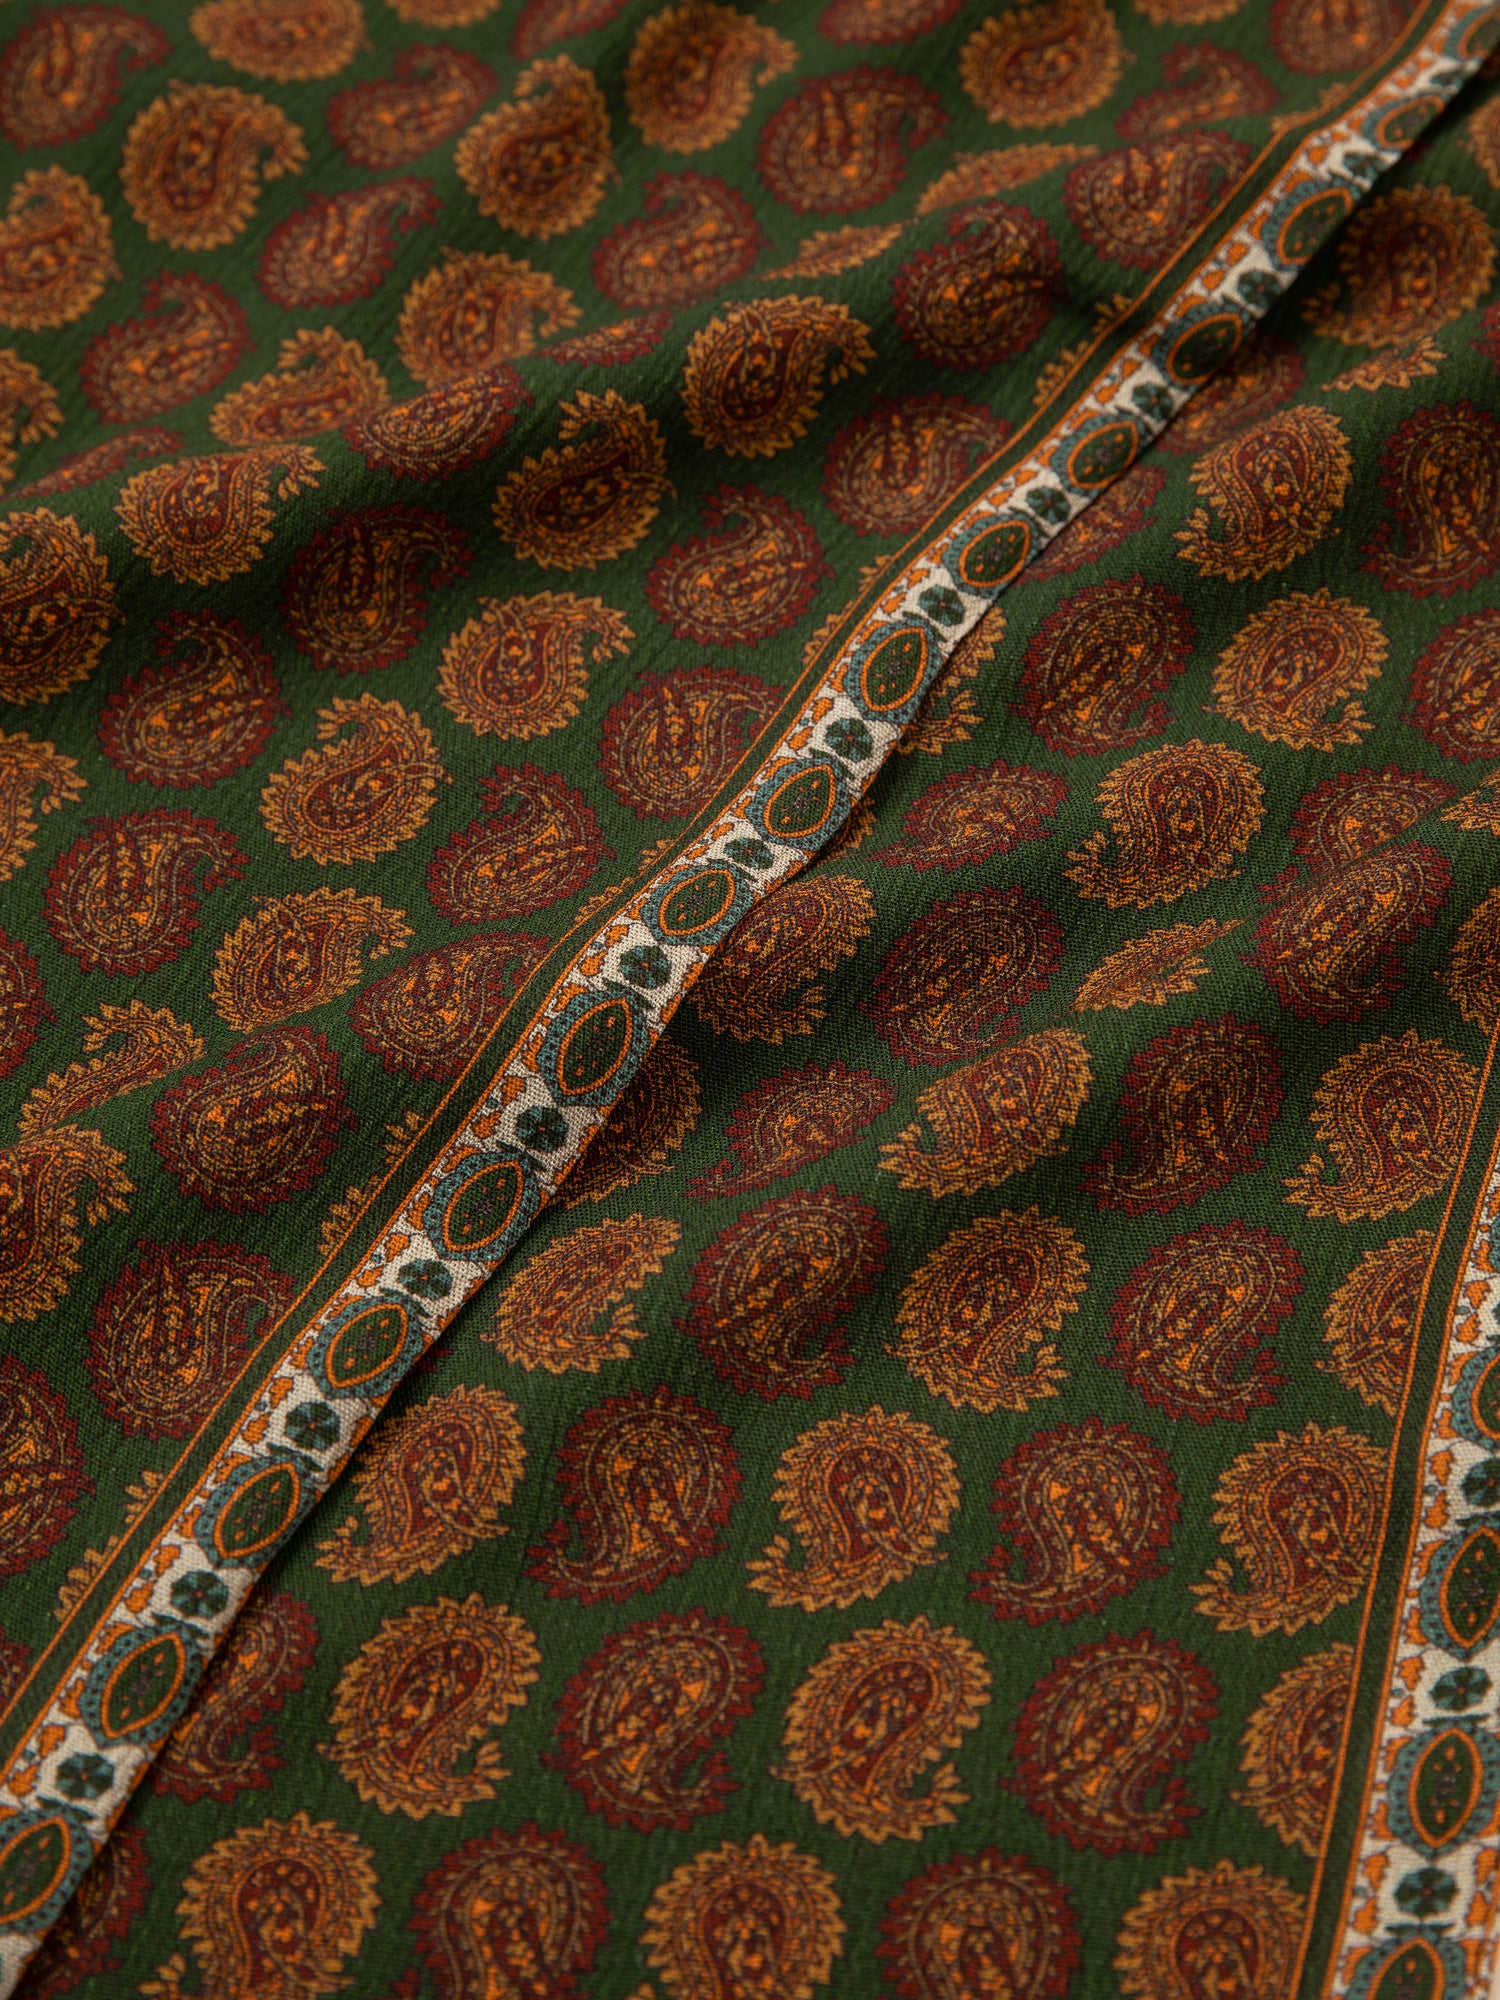 A close up of a Found Paisley Forest Scarf with a paisley print fabric and hand-tied tassels.